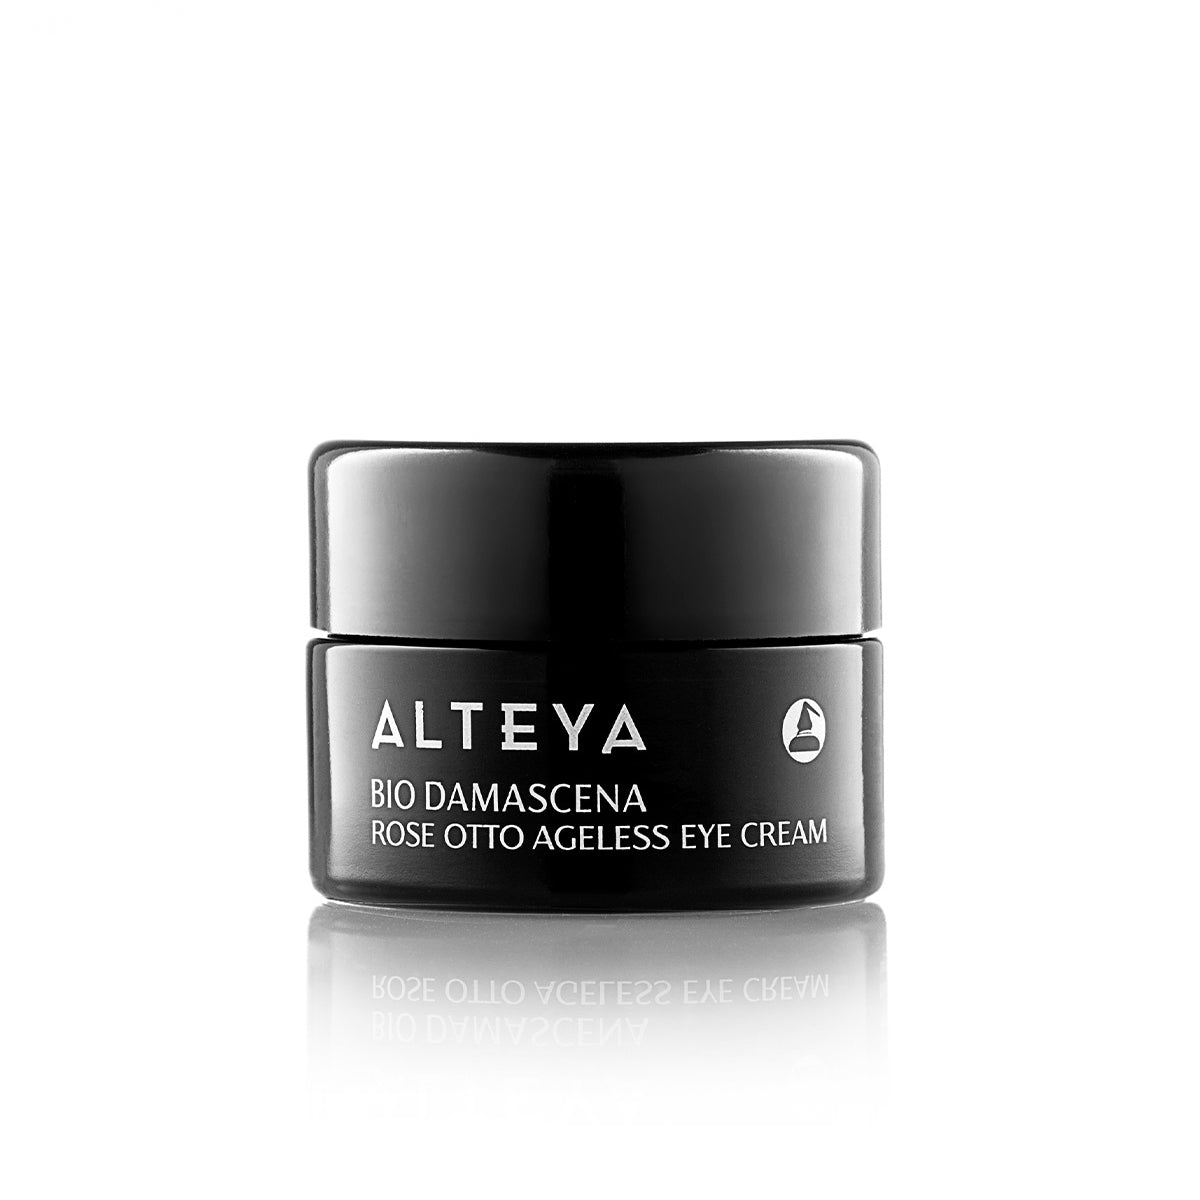 This intensive eye contour cream delivers optimal nourishment and helps protect delicate under-eye skin from dehydration, promoting more youthful and radiant look. It helps replenish antioxidants to strengthen skin and visibly reduces signs of aging, while providing long-lasting moisture.